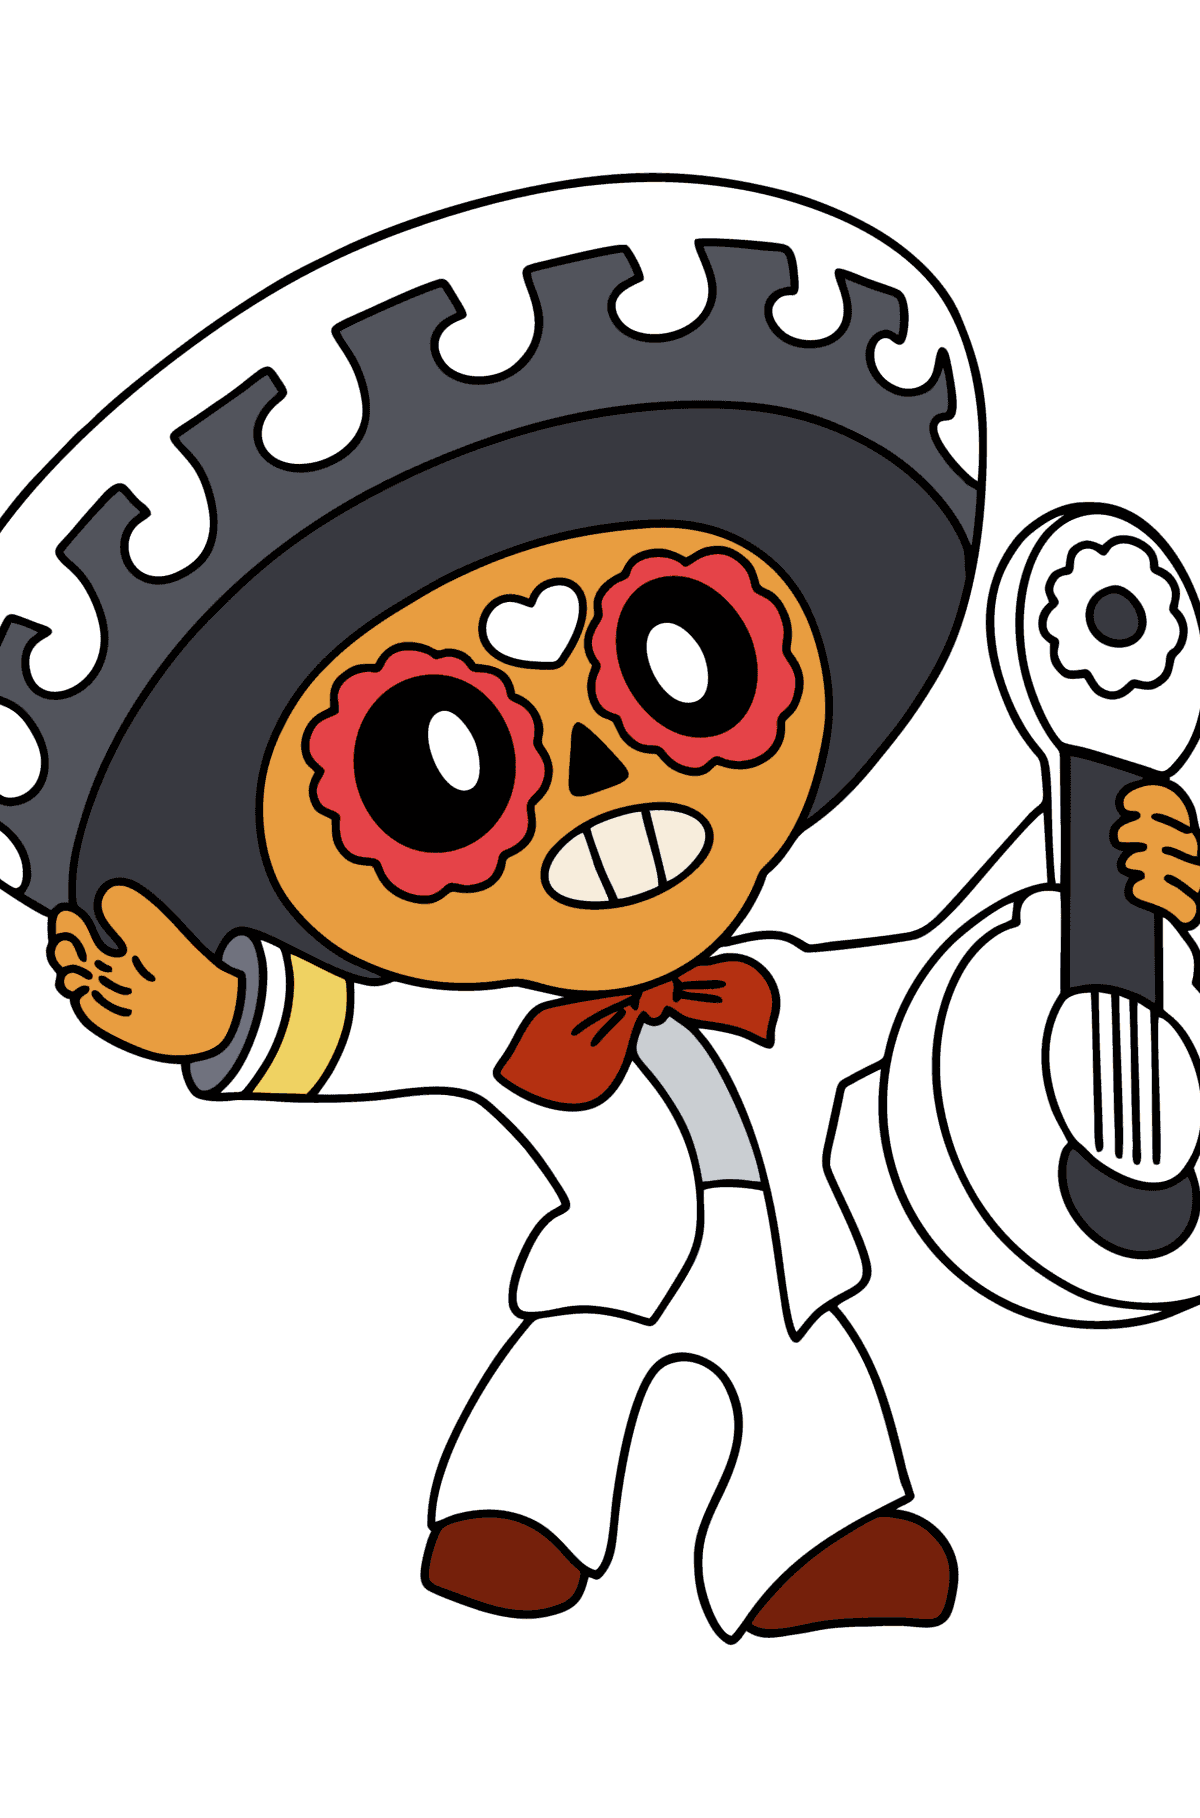 Brawl Stars Poco coloring page - Coloring Pages for Kids